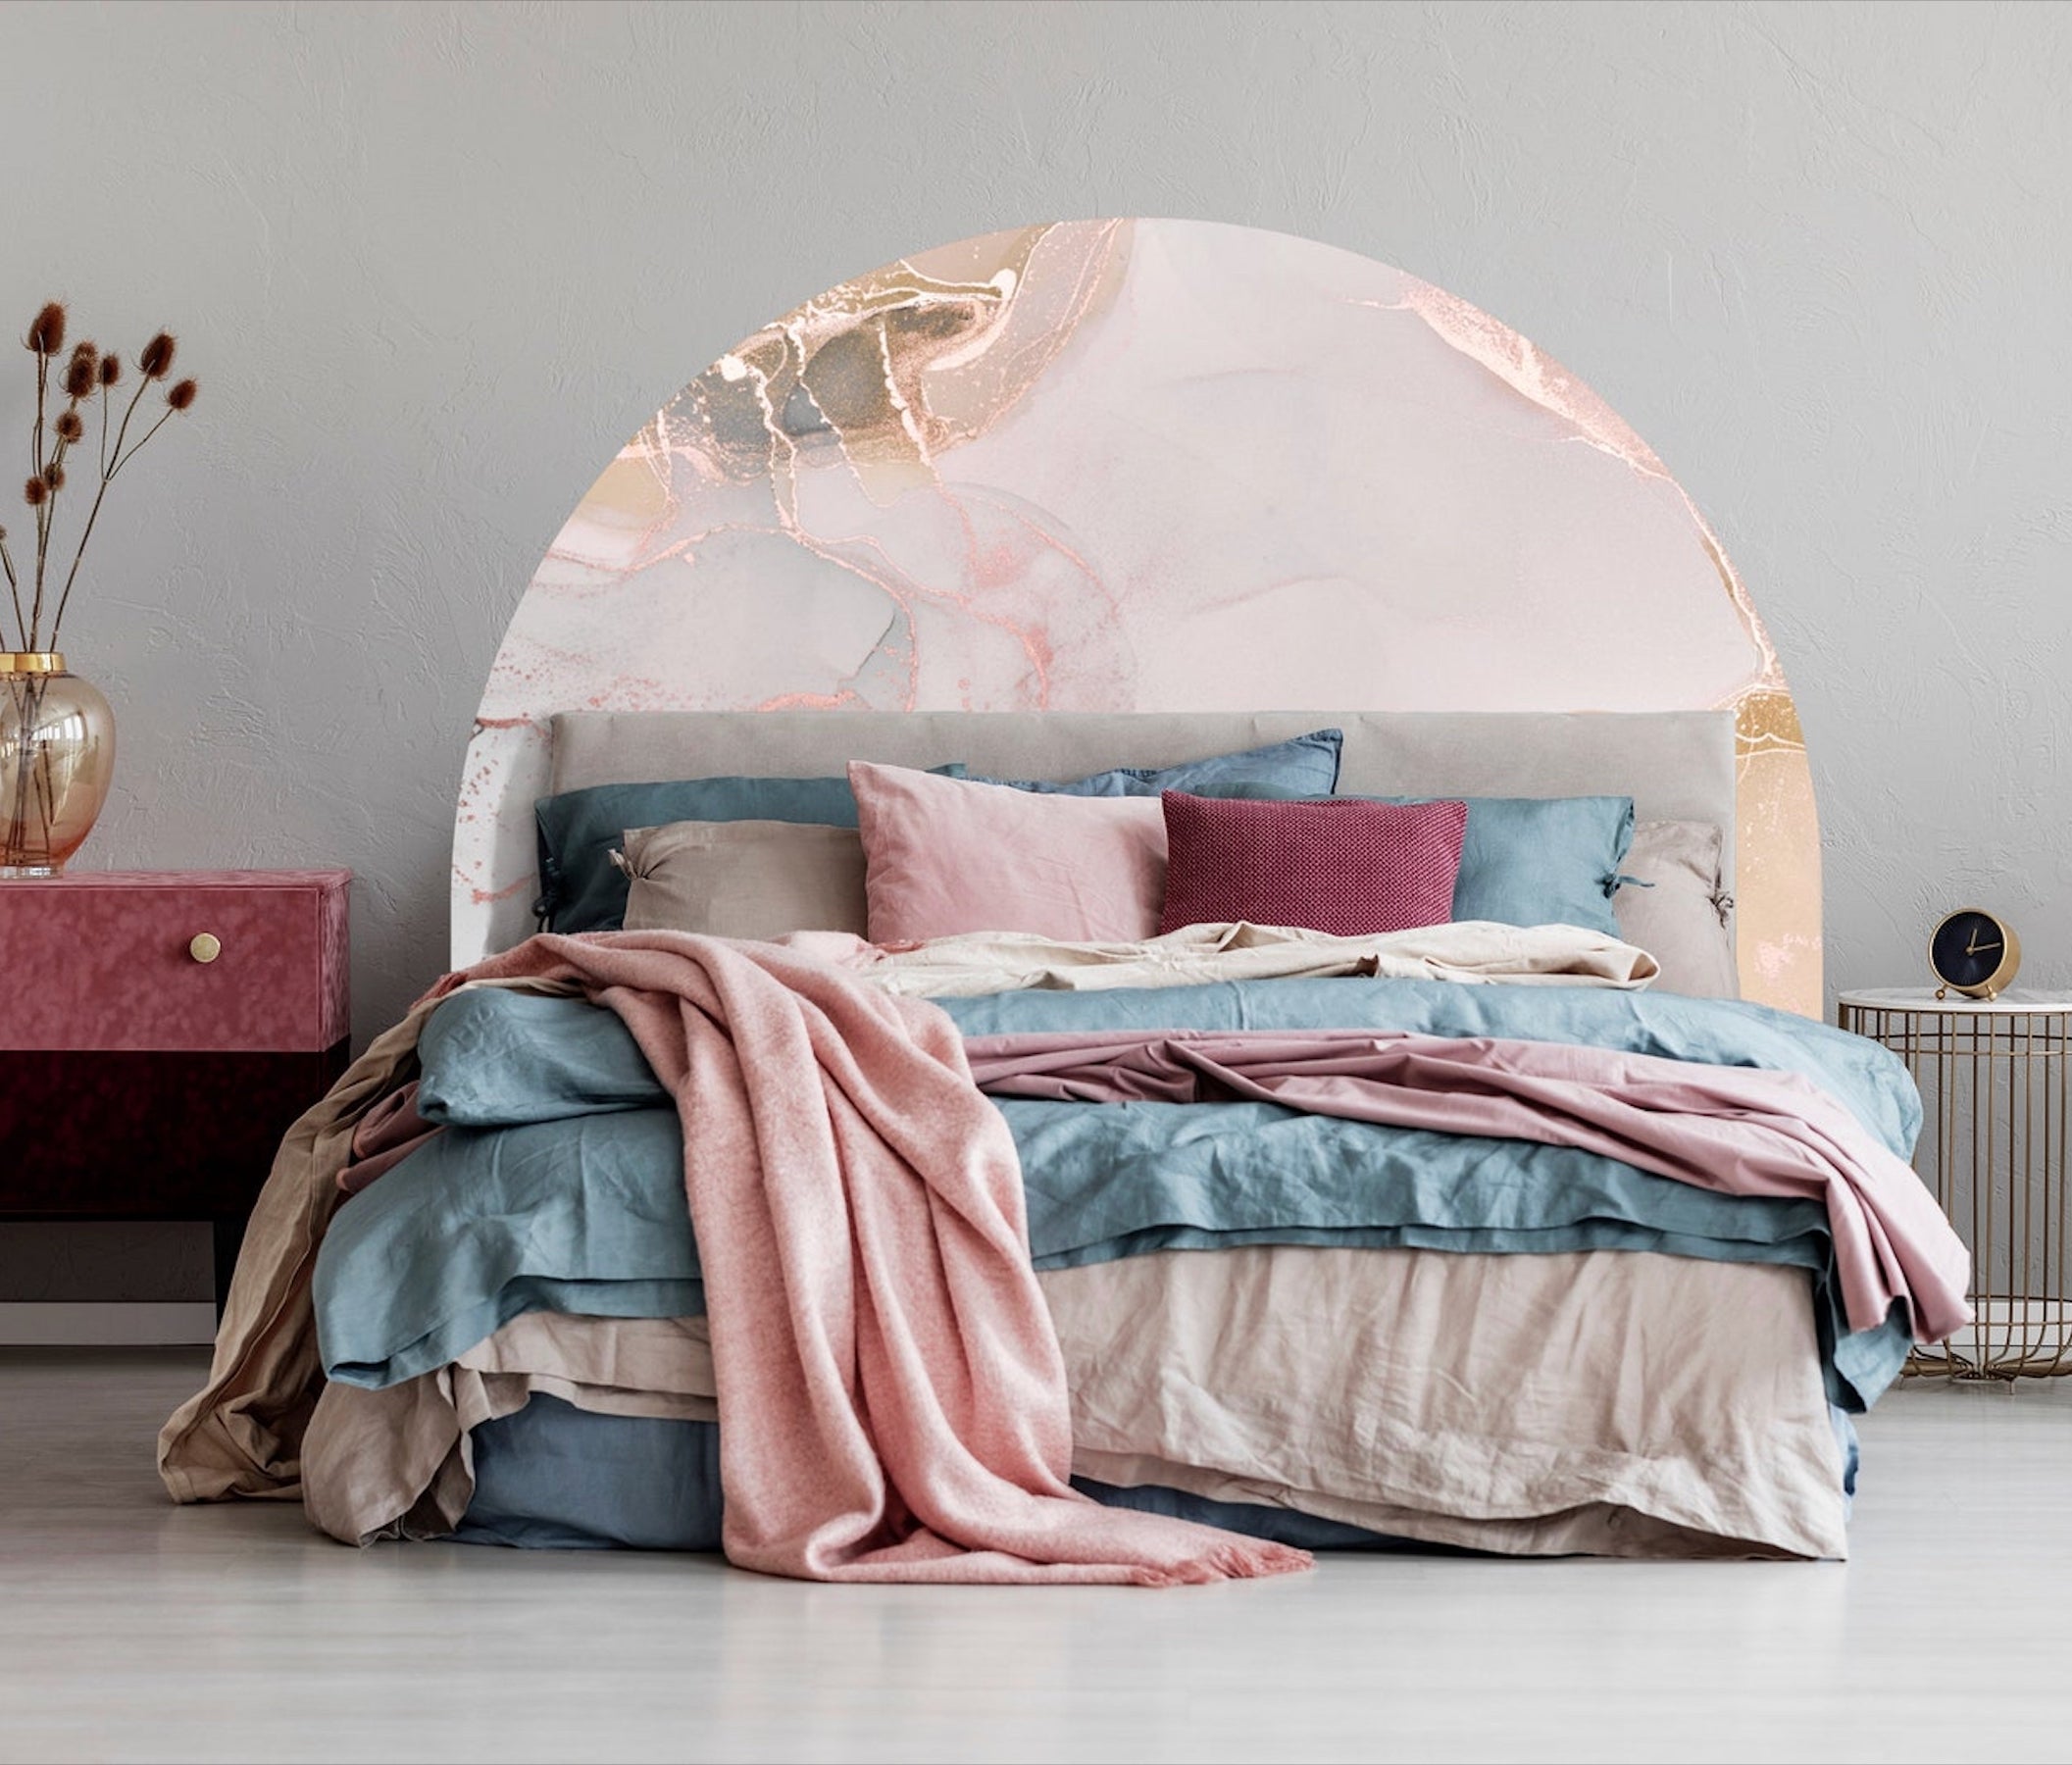 A decale of pinkish marble in an arch serves as a headboard for a bed with blue and pink bedding and blue, gray, red, and pink throw pillows.